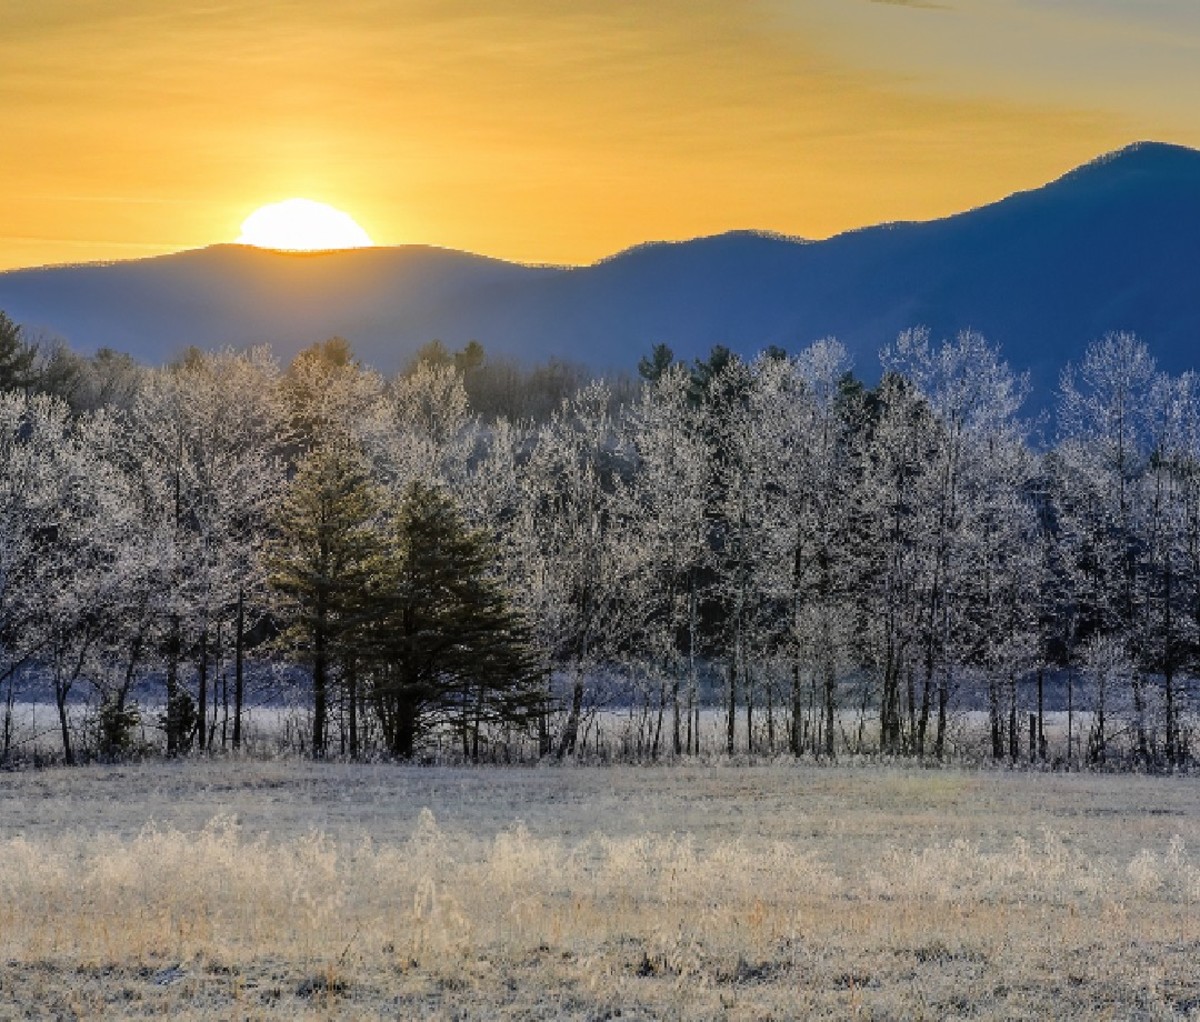 Sun rising over a frost covered landscape in Cades Cove of the Great Smoky Mountains.